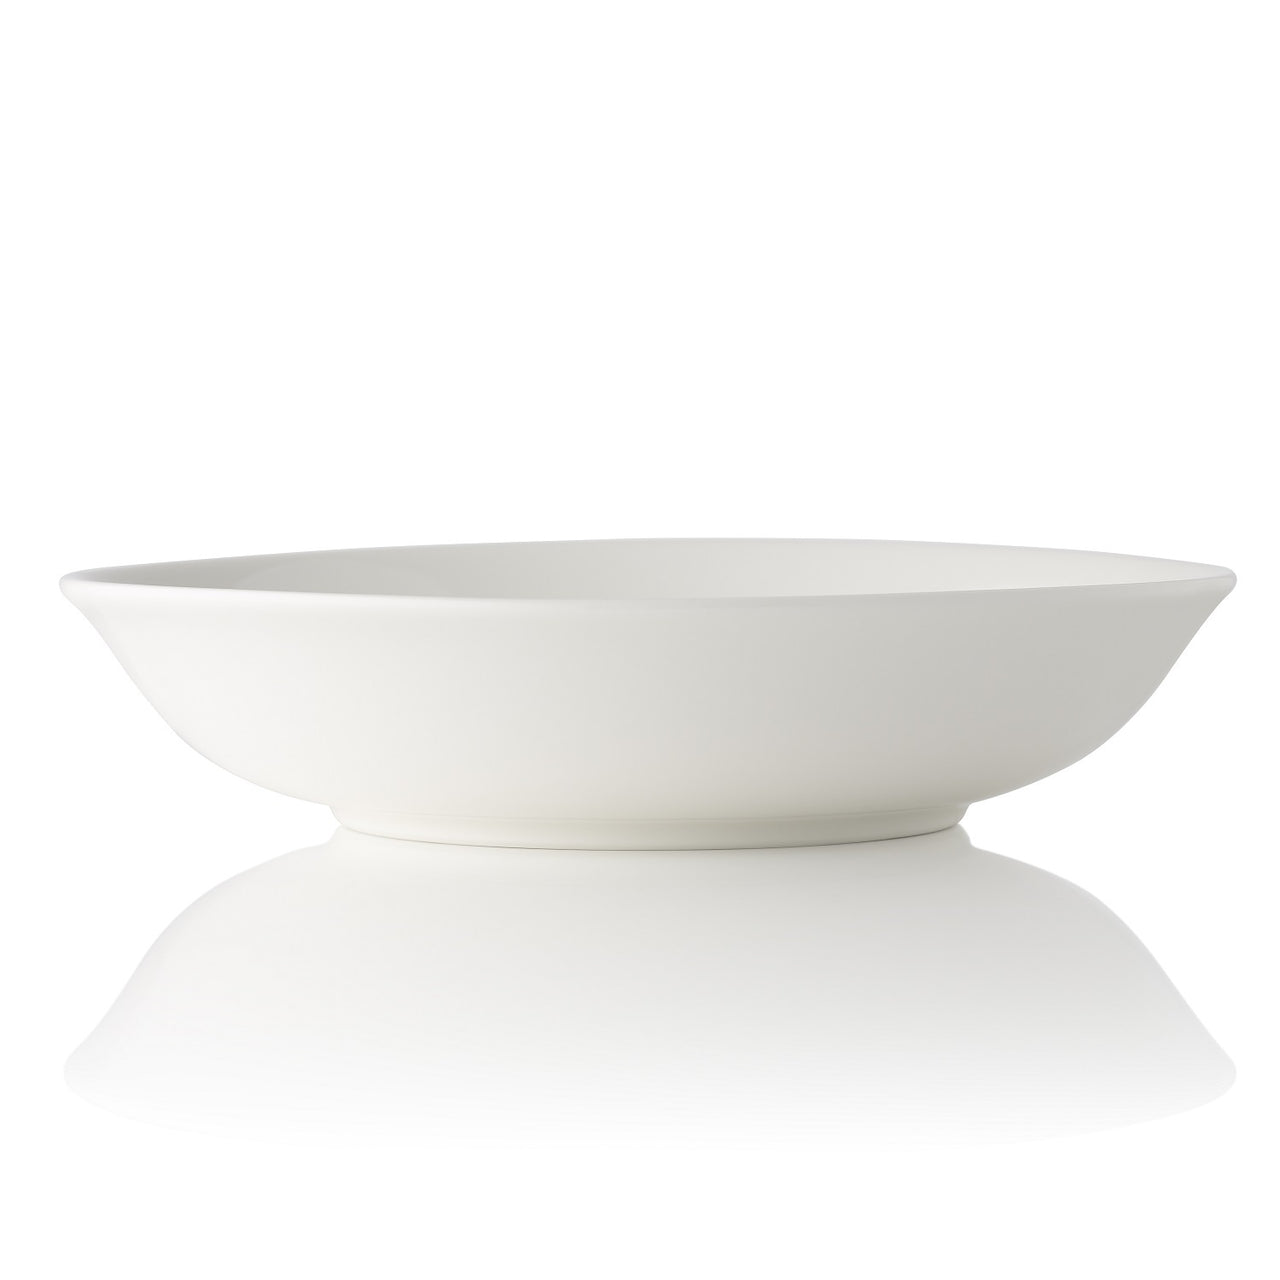 Everyday by Adam Liaw 22.5cm Pasta Bowls (Set of 4)